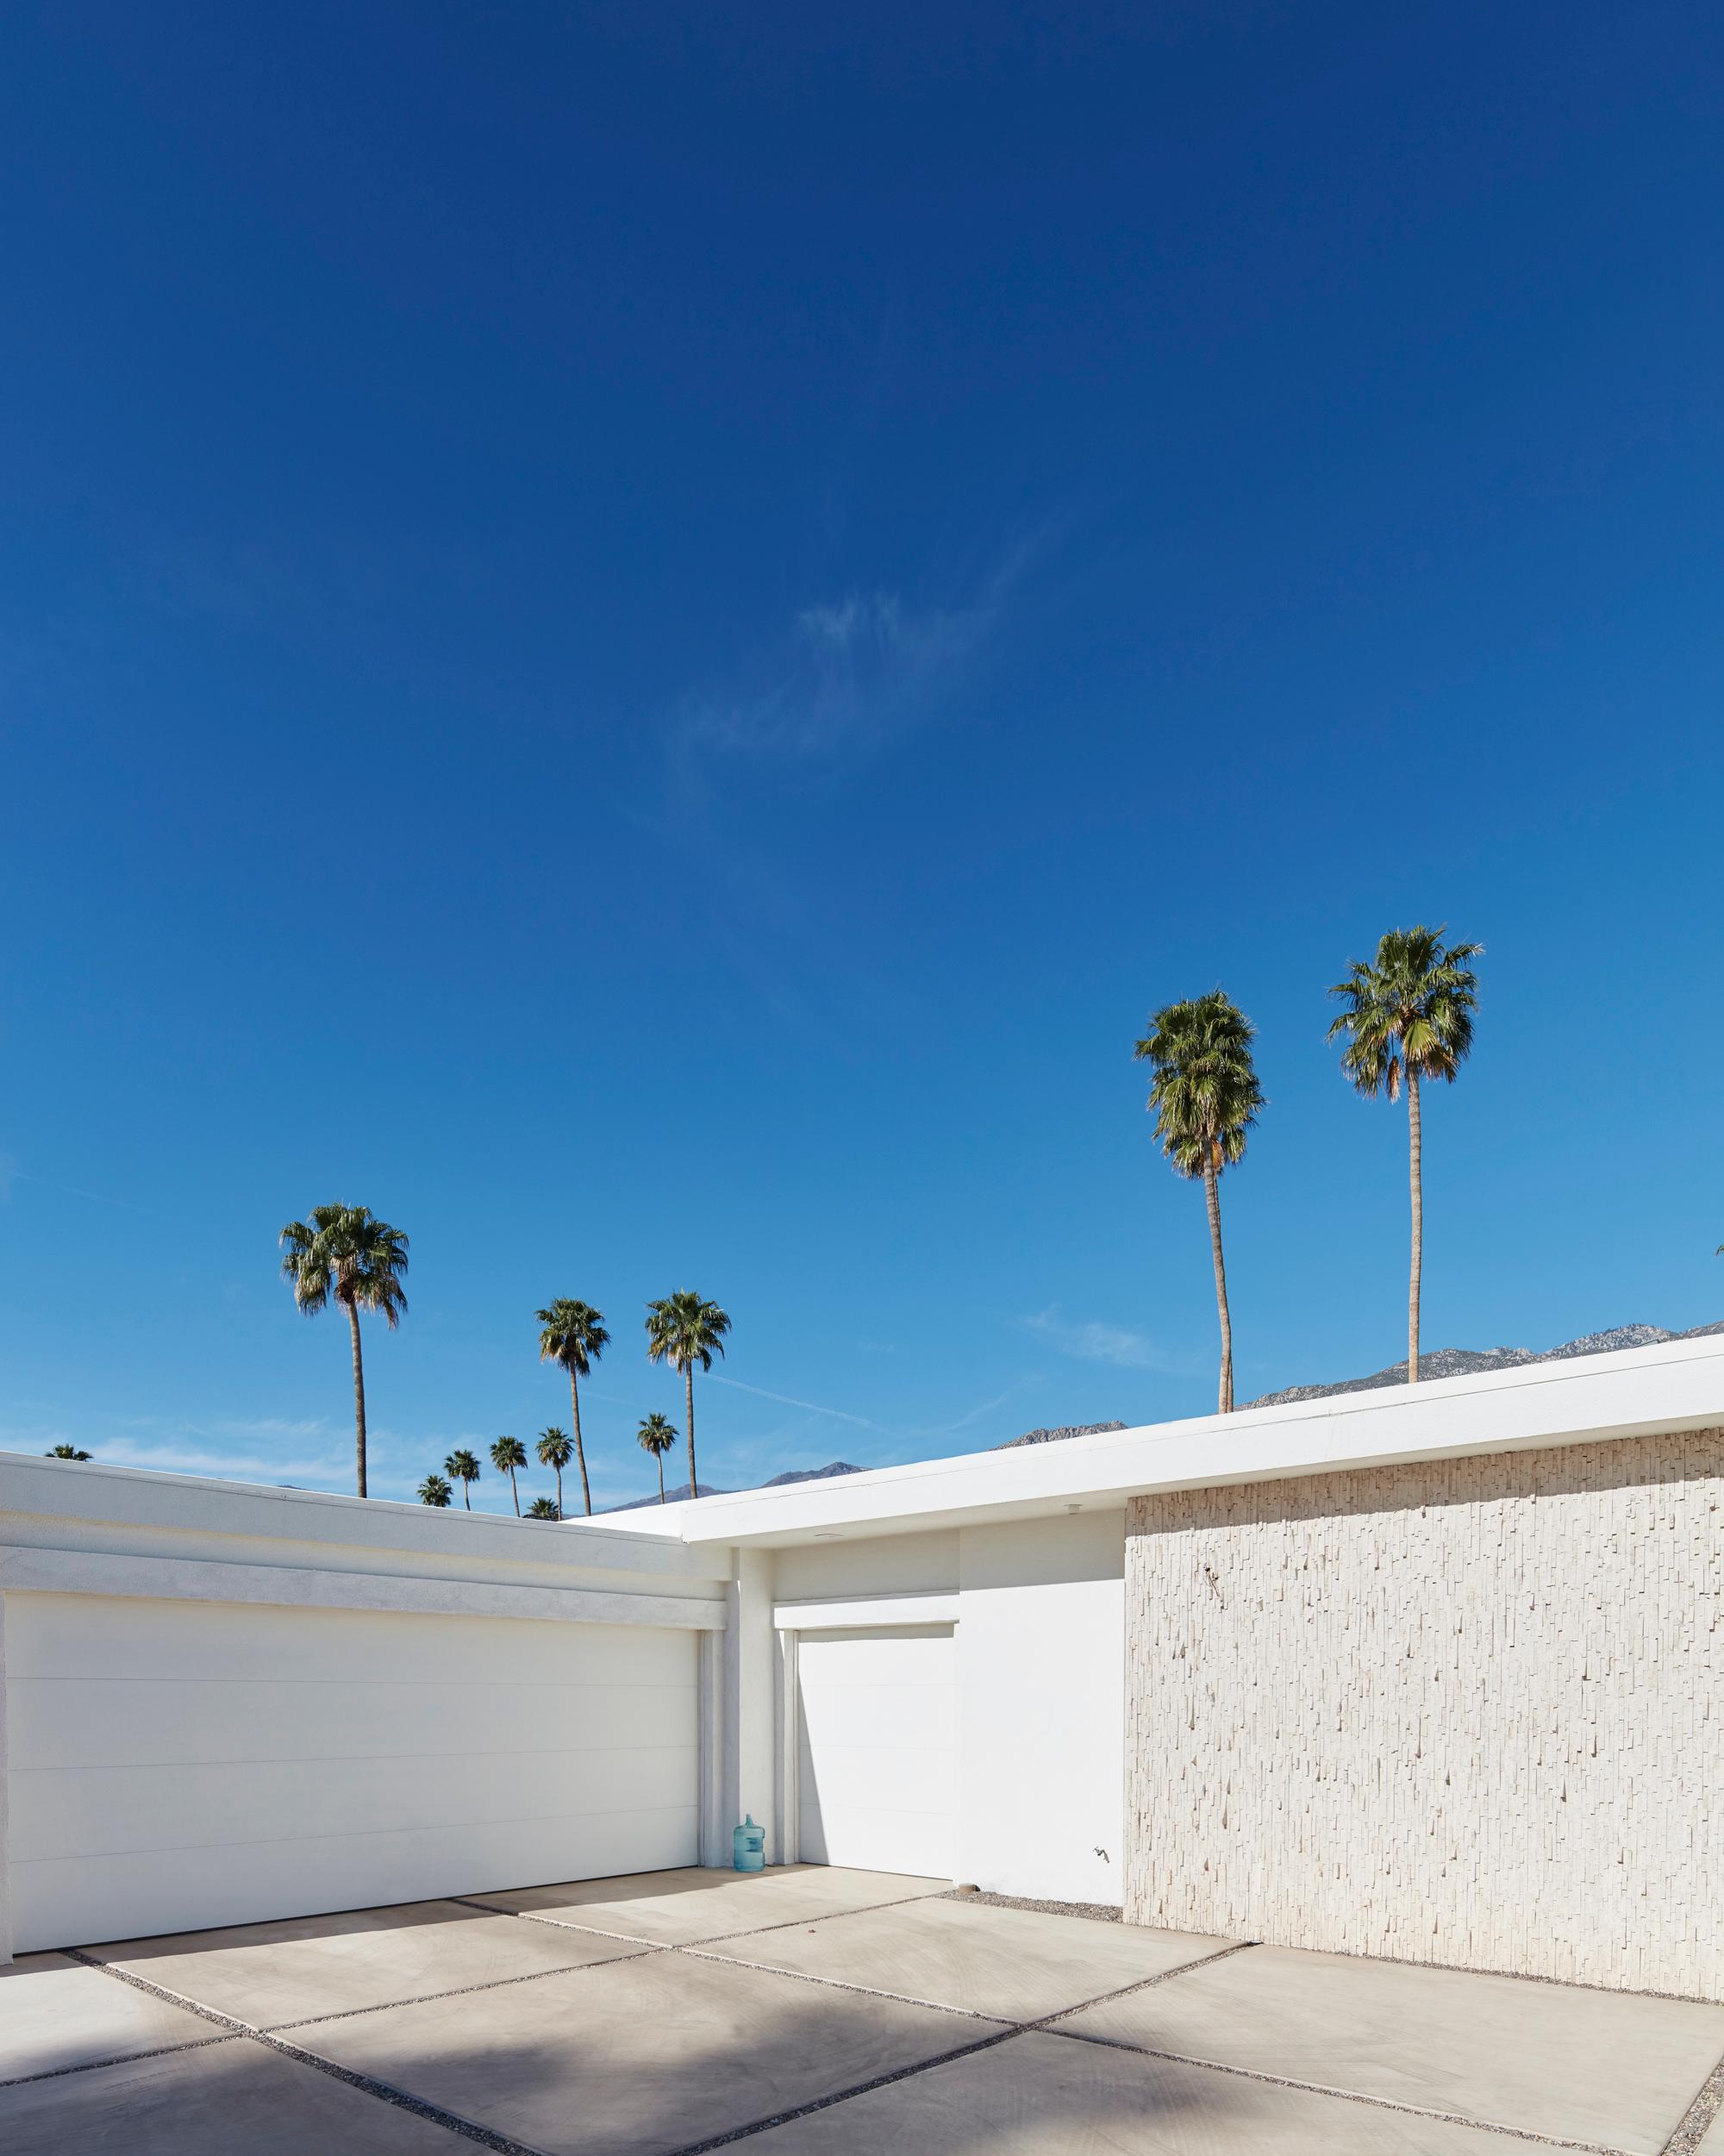 Frank Schott Landscape Photograph - Palm Springs ( Water ) - a study of iconic mid century desert architecture